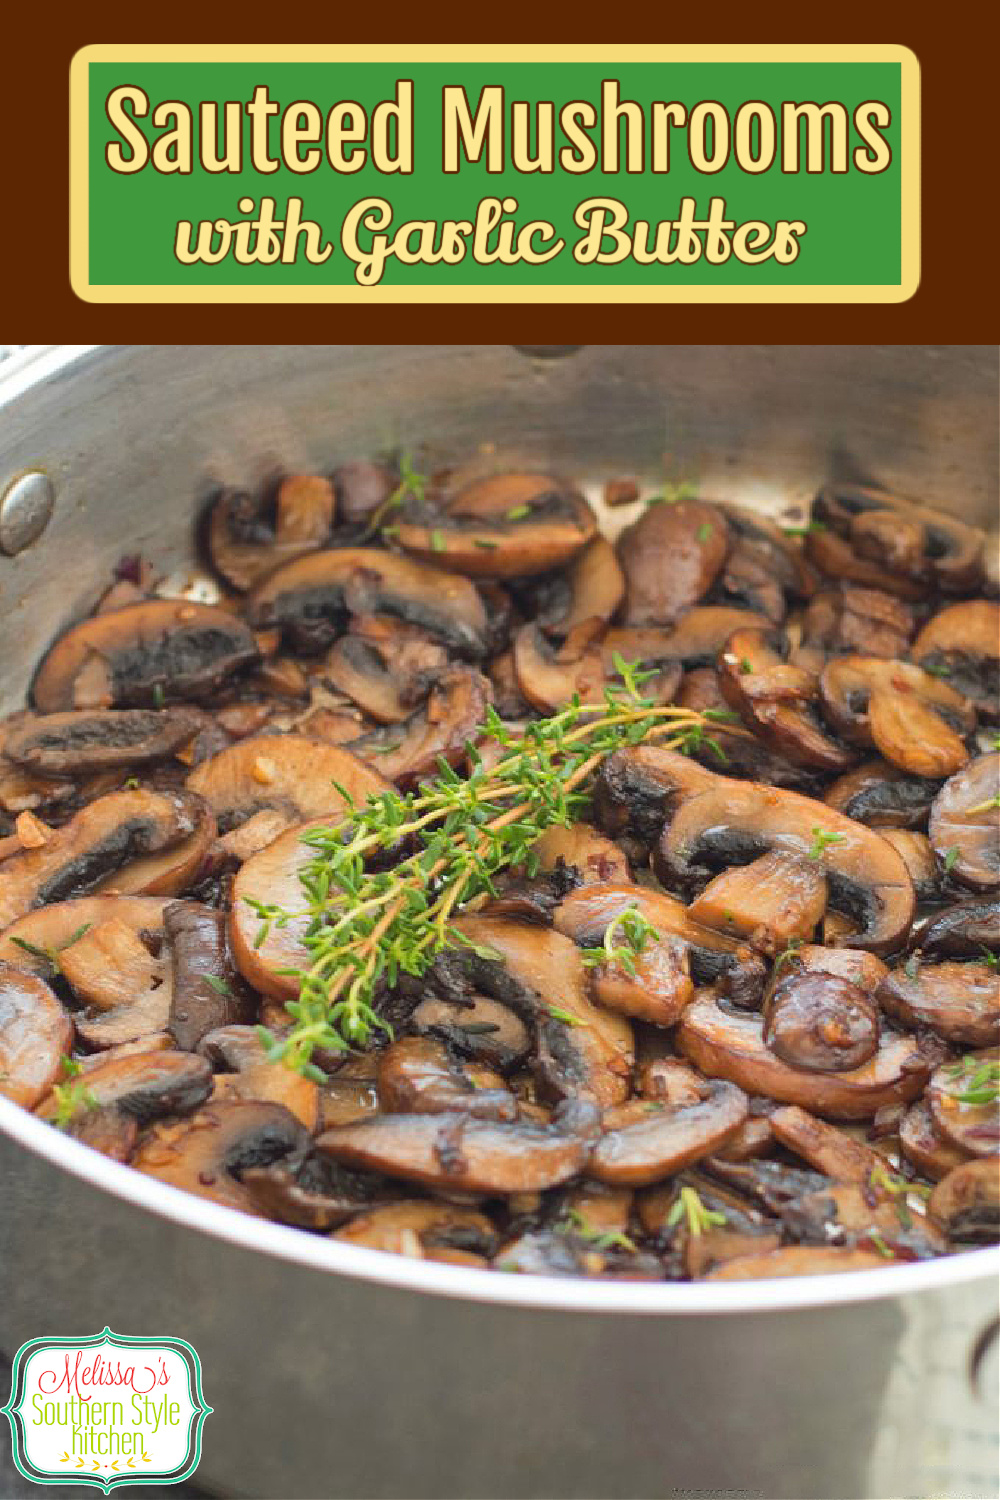 These simple Sauteed Mushrooms with Garlic Butter make a delicious embellishment for steak, chicken, pork and more. #sauteedmushrooms #garlicbutter #garlicmushrooms #portabellamushrooms #shitakemushrooms #mushroomrecipes #sidedishrecipes #food #recipes #southernrecipes #southernfood #creminimushrooms via @melissasssk